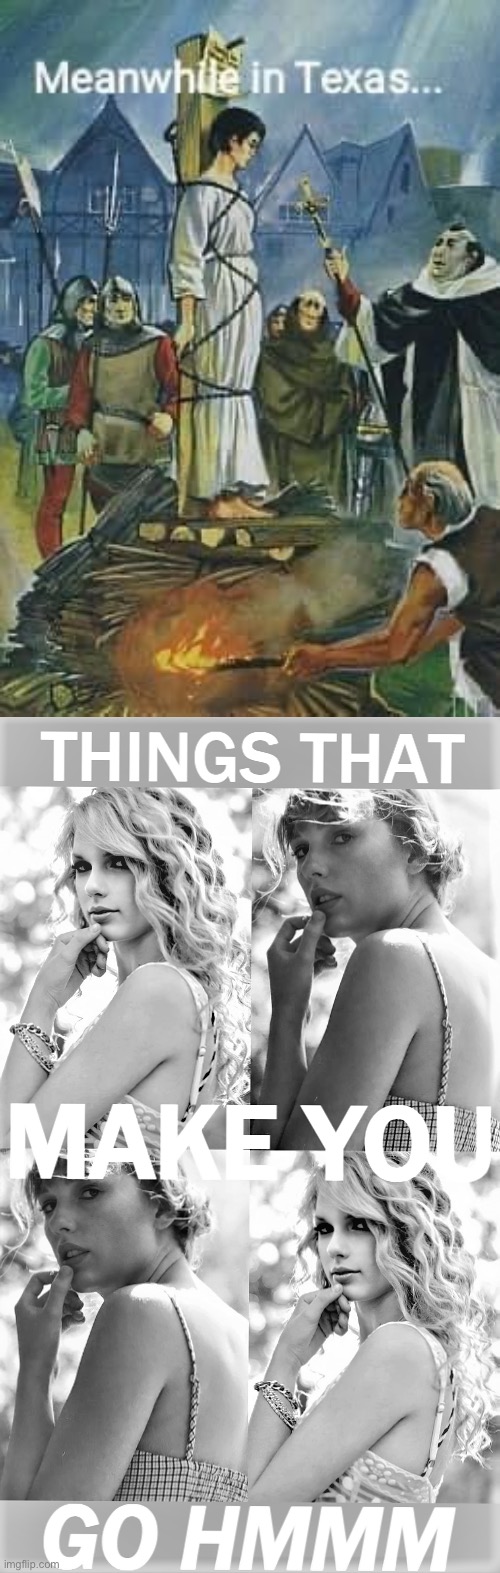 Hmmm | image tagged in meanwhile in texas,taylor swift things that make you go hmmm redux | made w/ Imgflip meme maker